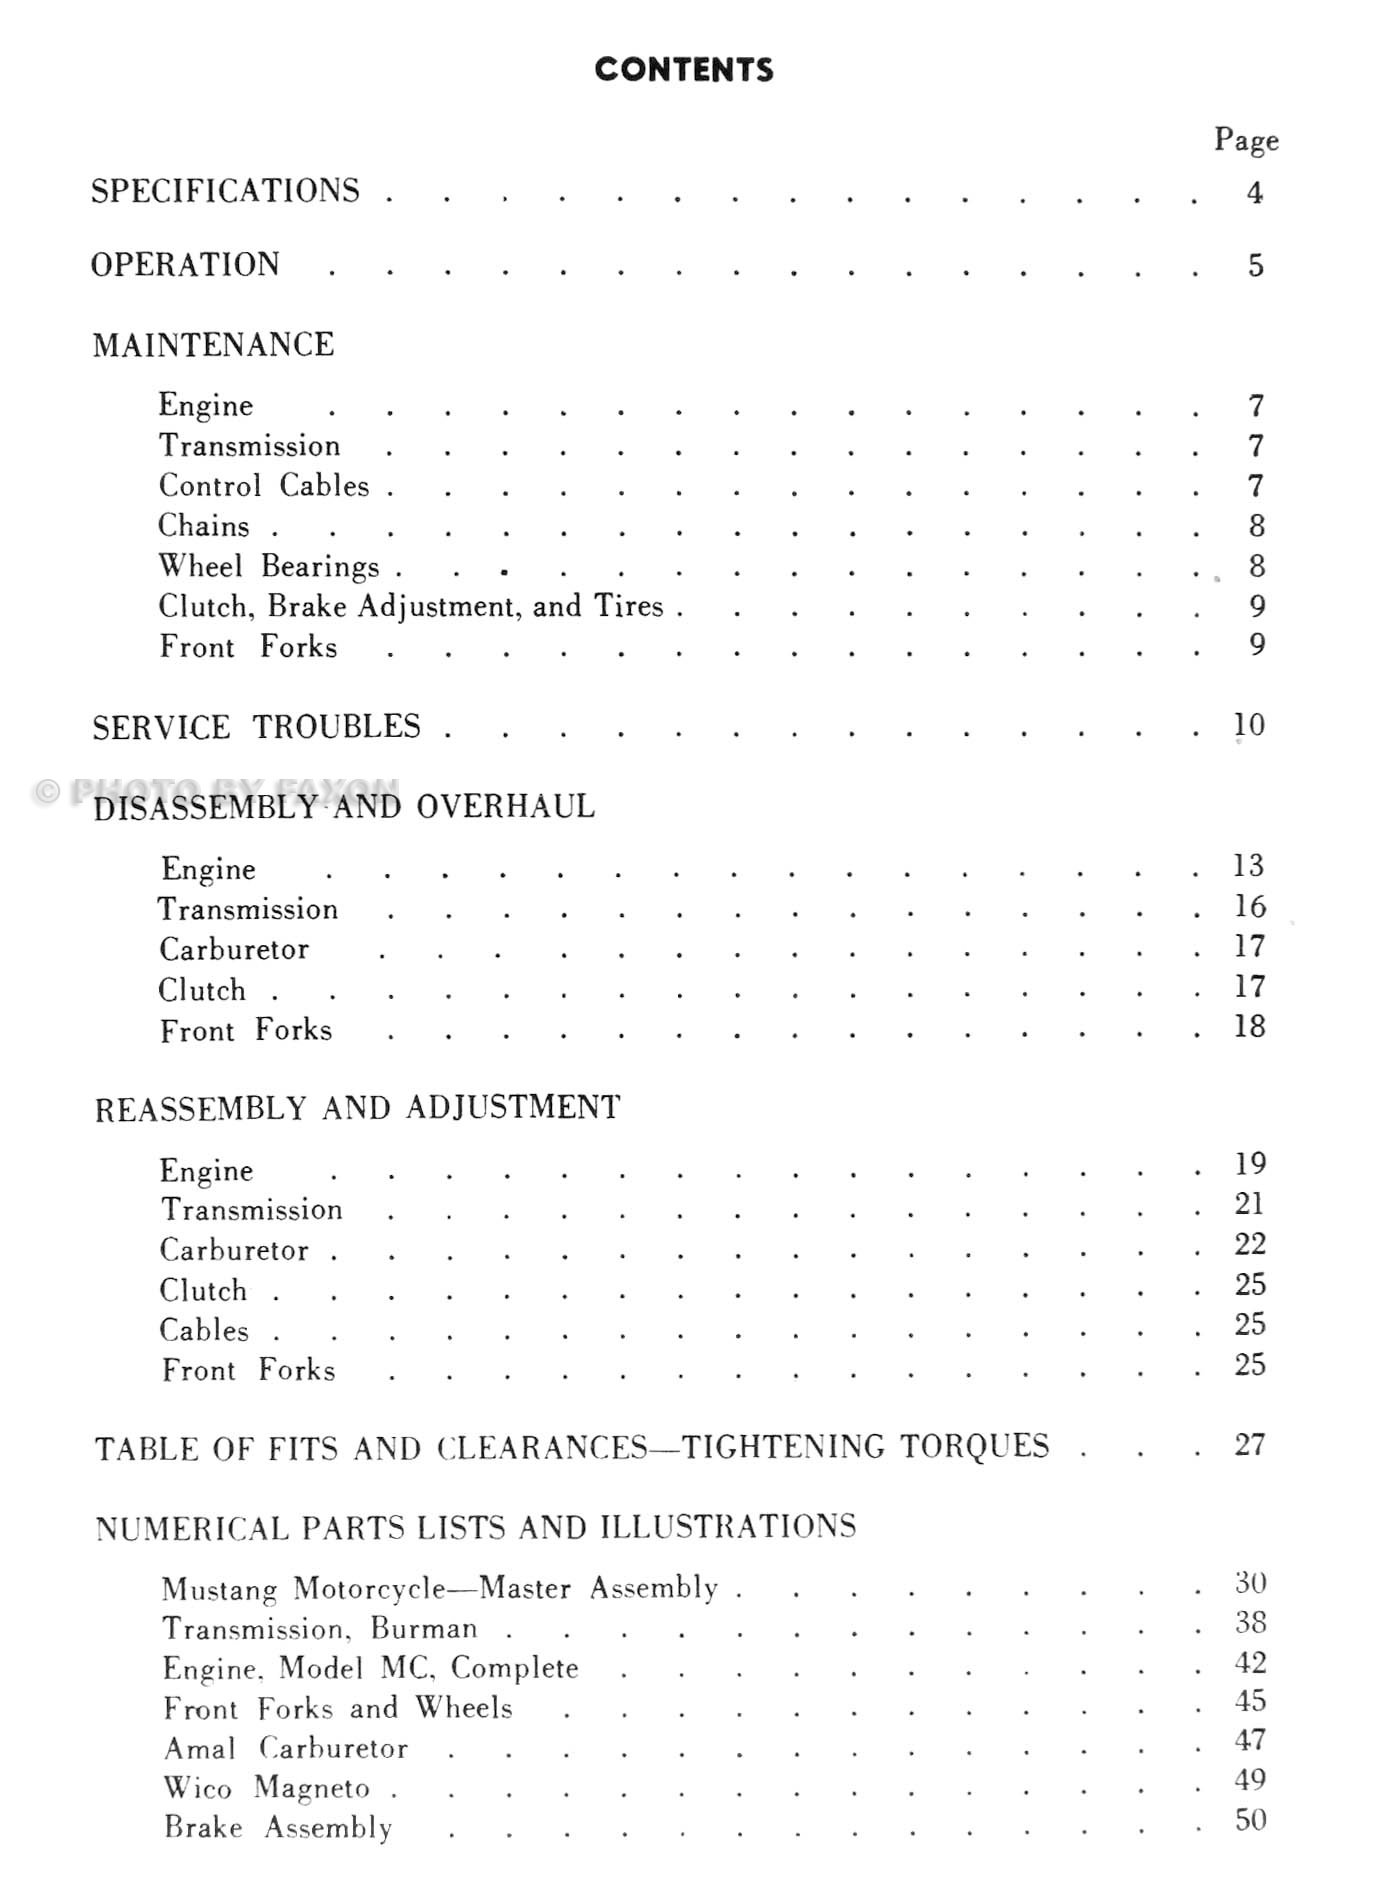 Onwer's Manual Table of Contents